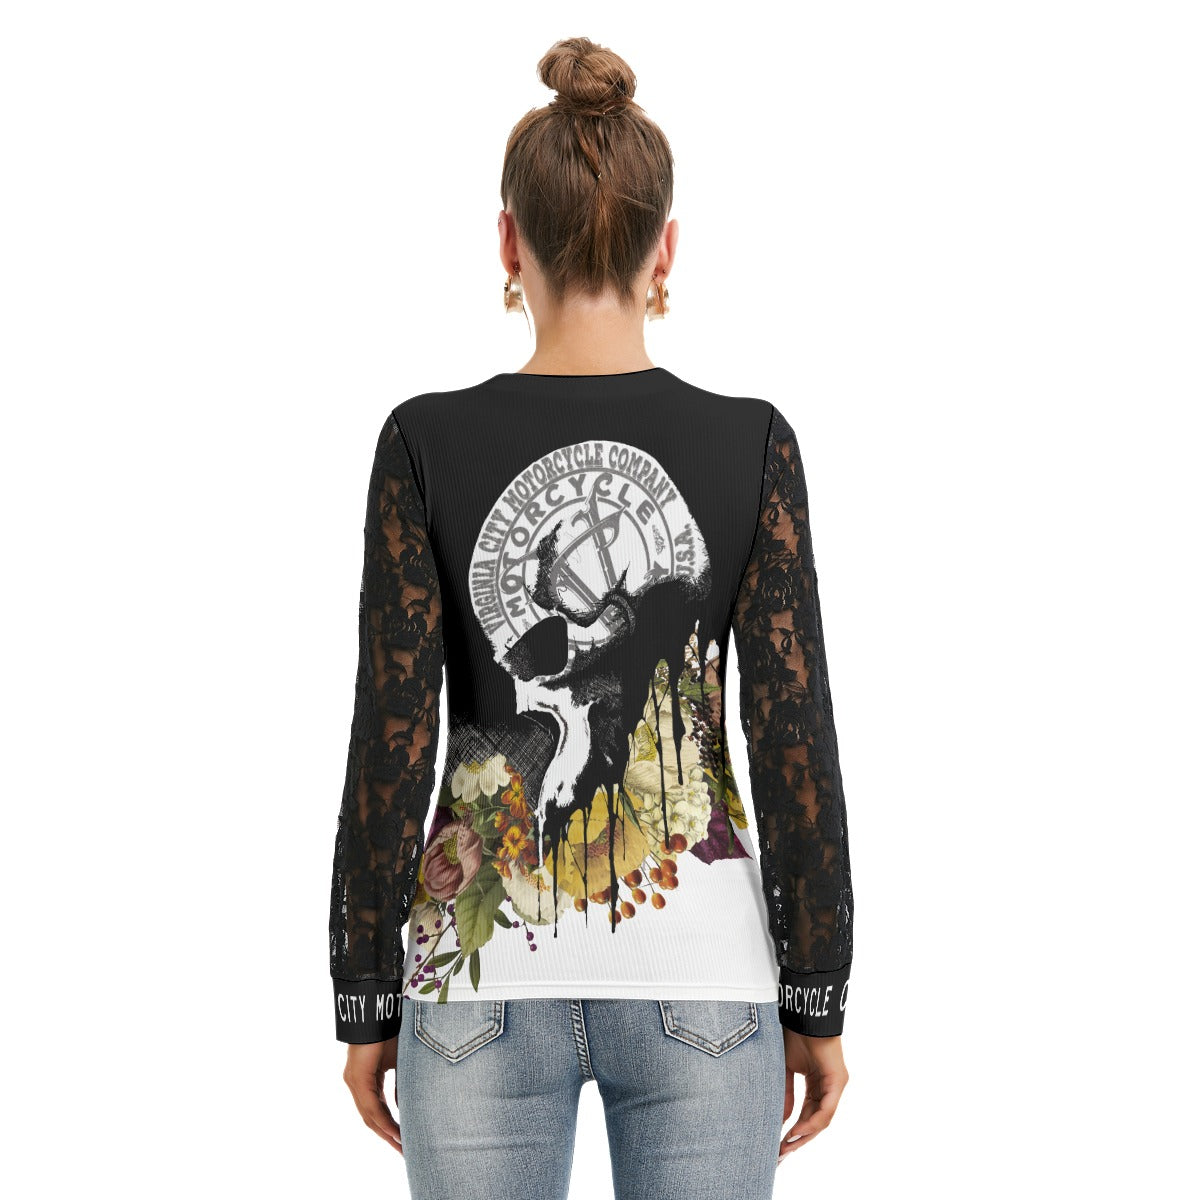 Black and Flower Skull T-Shirt with Lace Arms Ladies T-Shirt Virginia City Motorcycle Company Apparel 